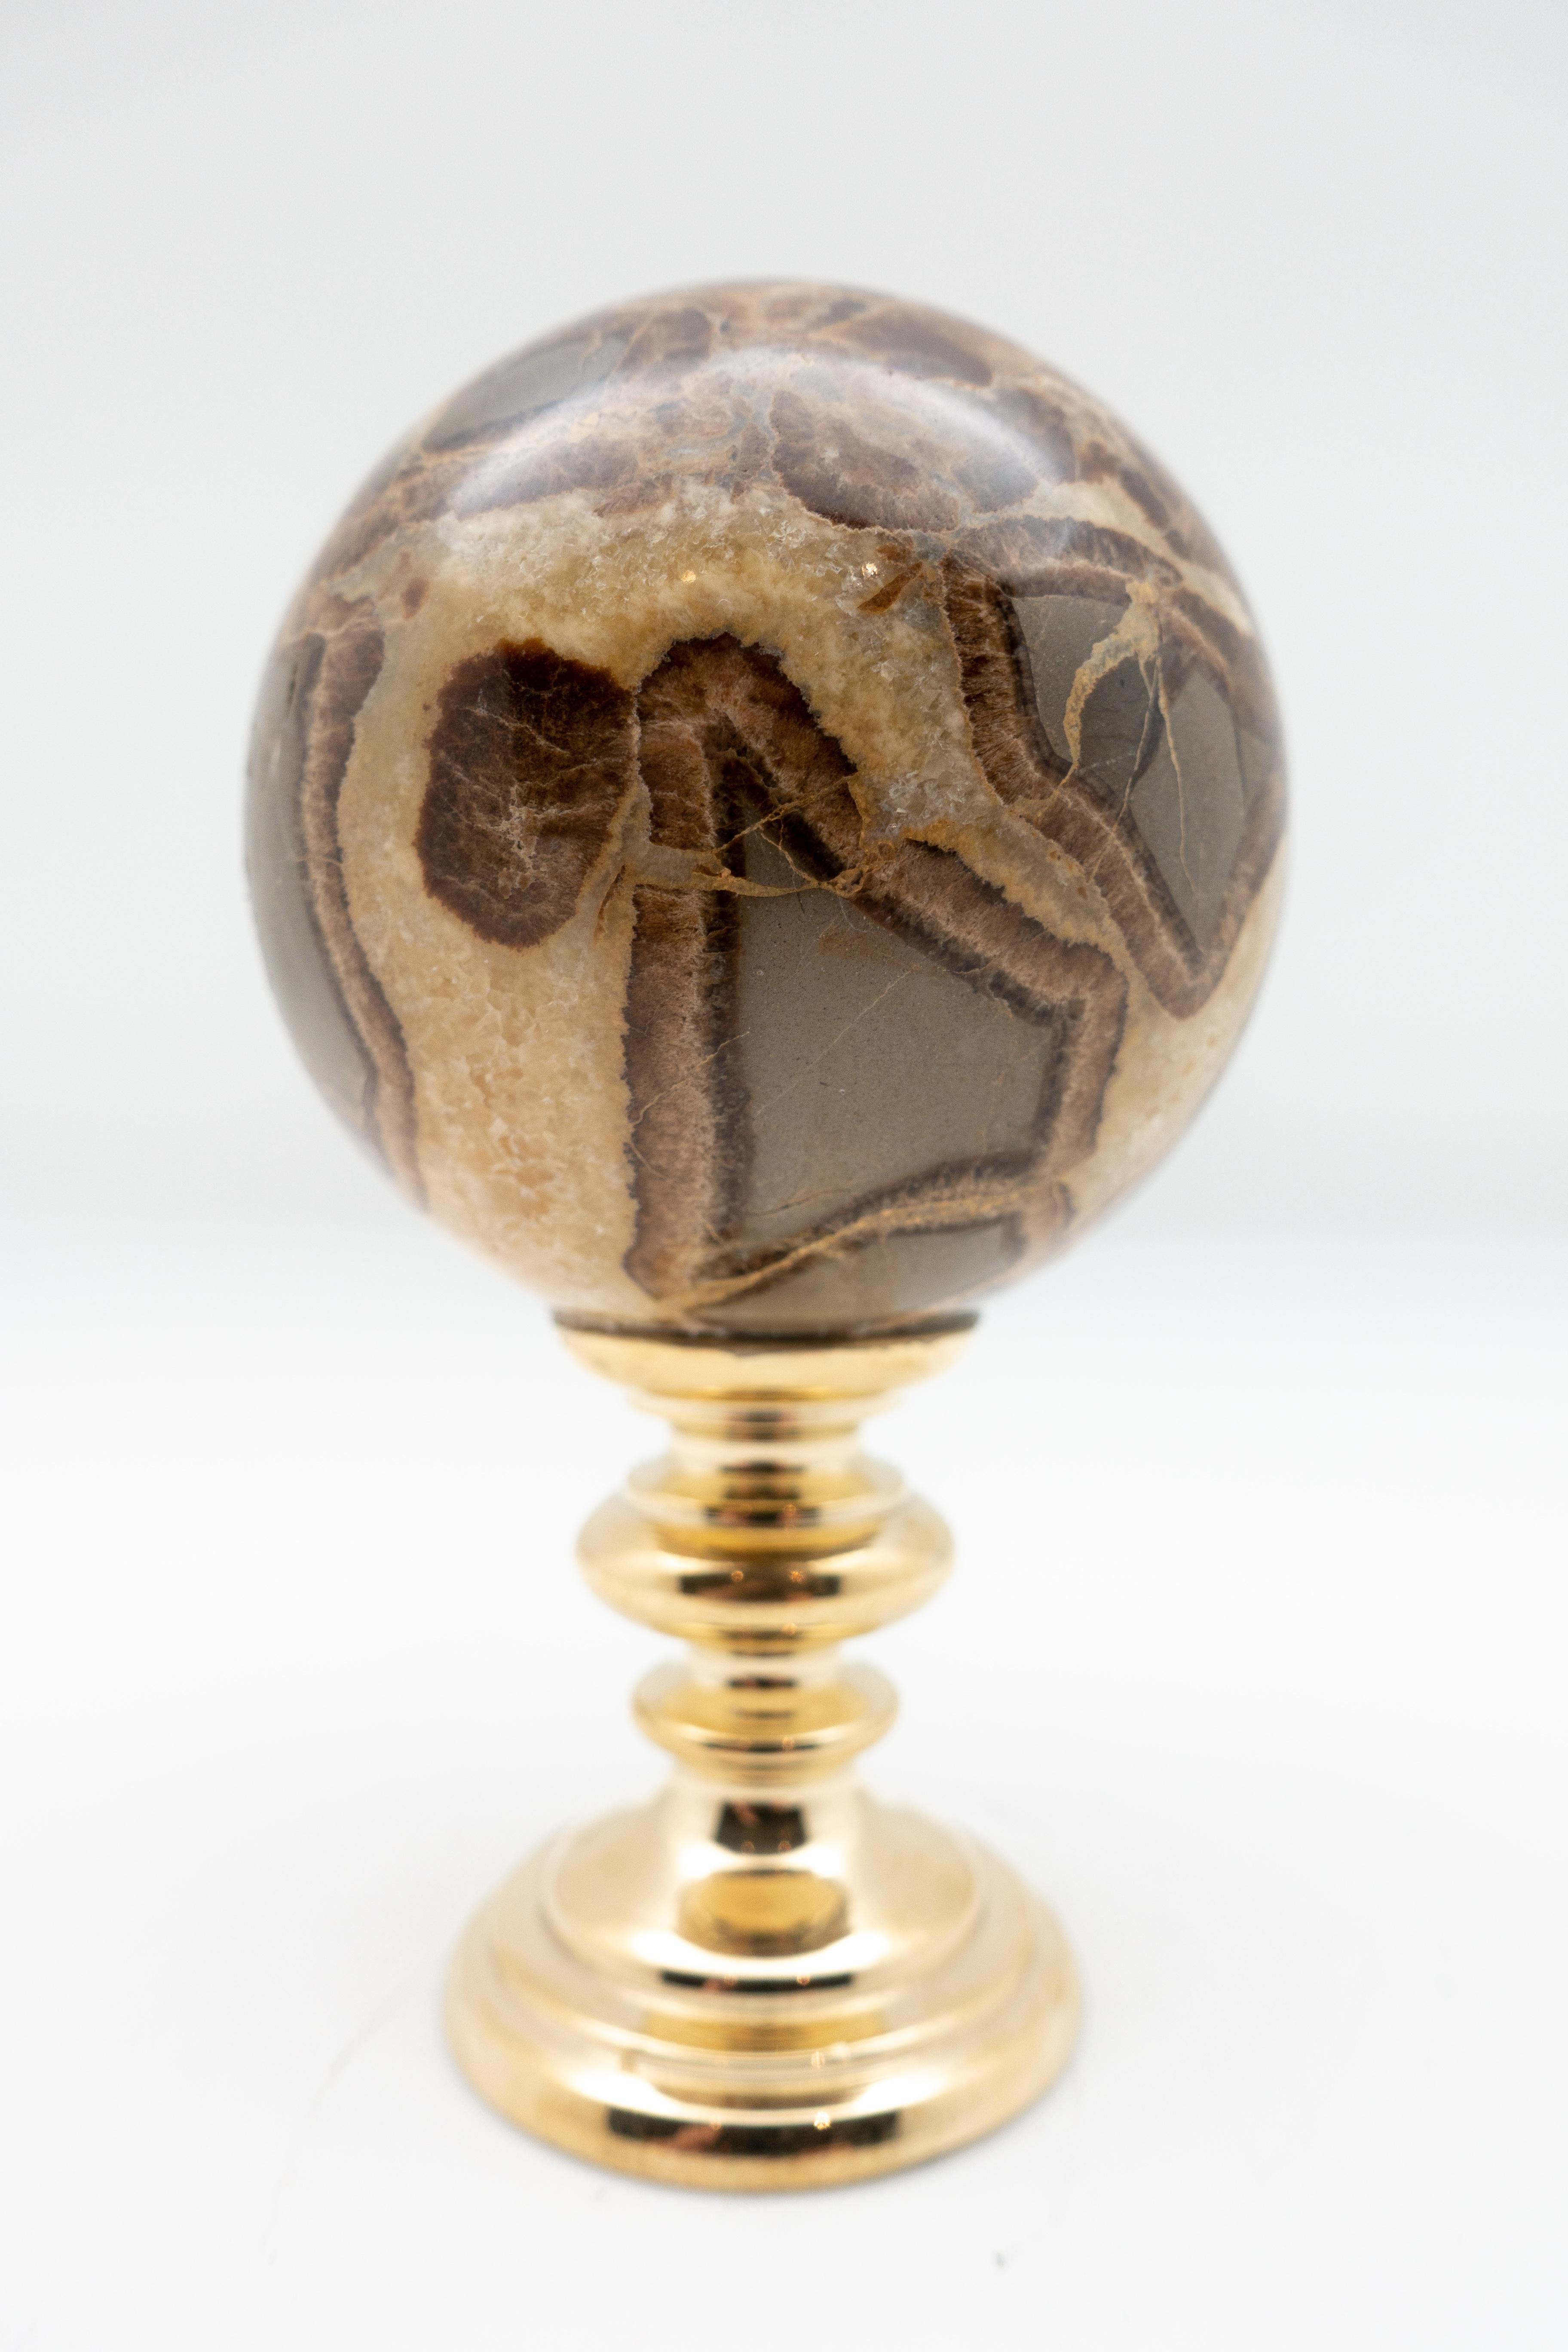 Septarian sphere mounted on a brass stand. Septarian is a member of the carbonate family, coming in beautiful shades of black, gold, brown and beige. Measures: 2.75